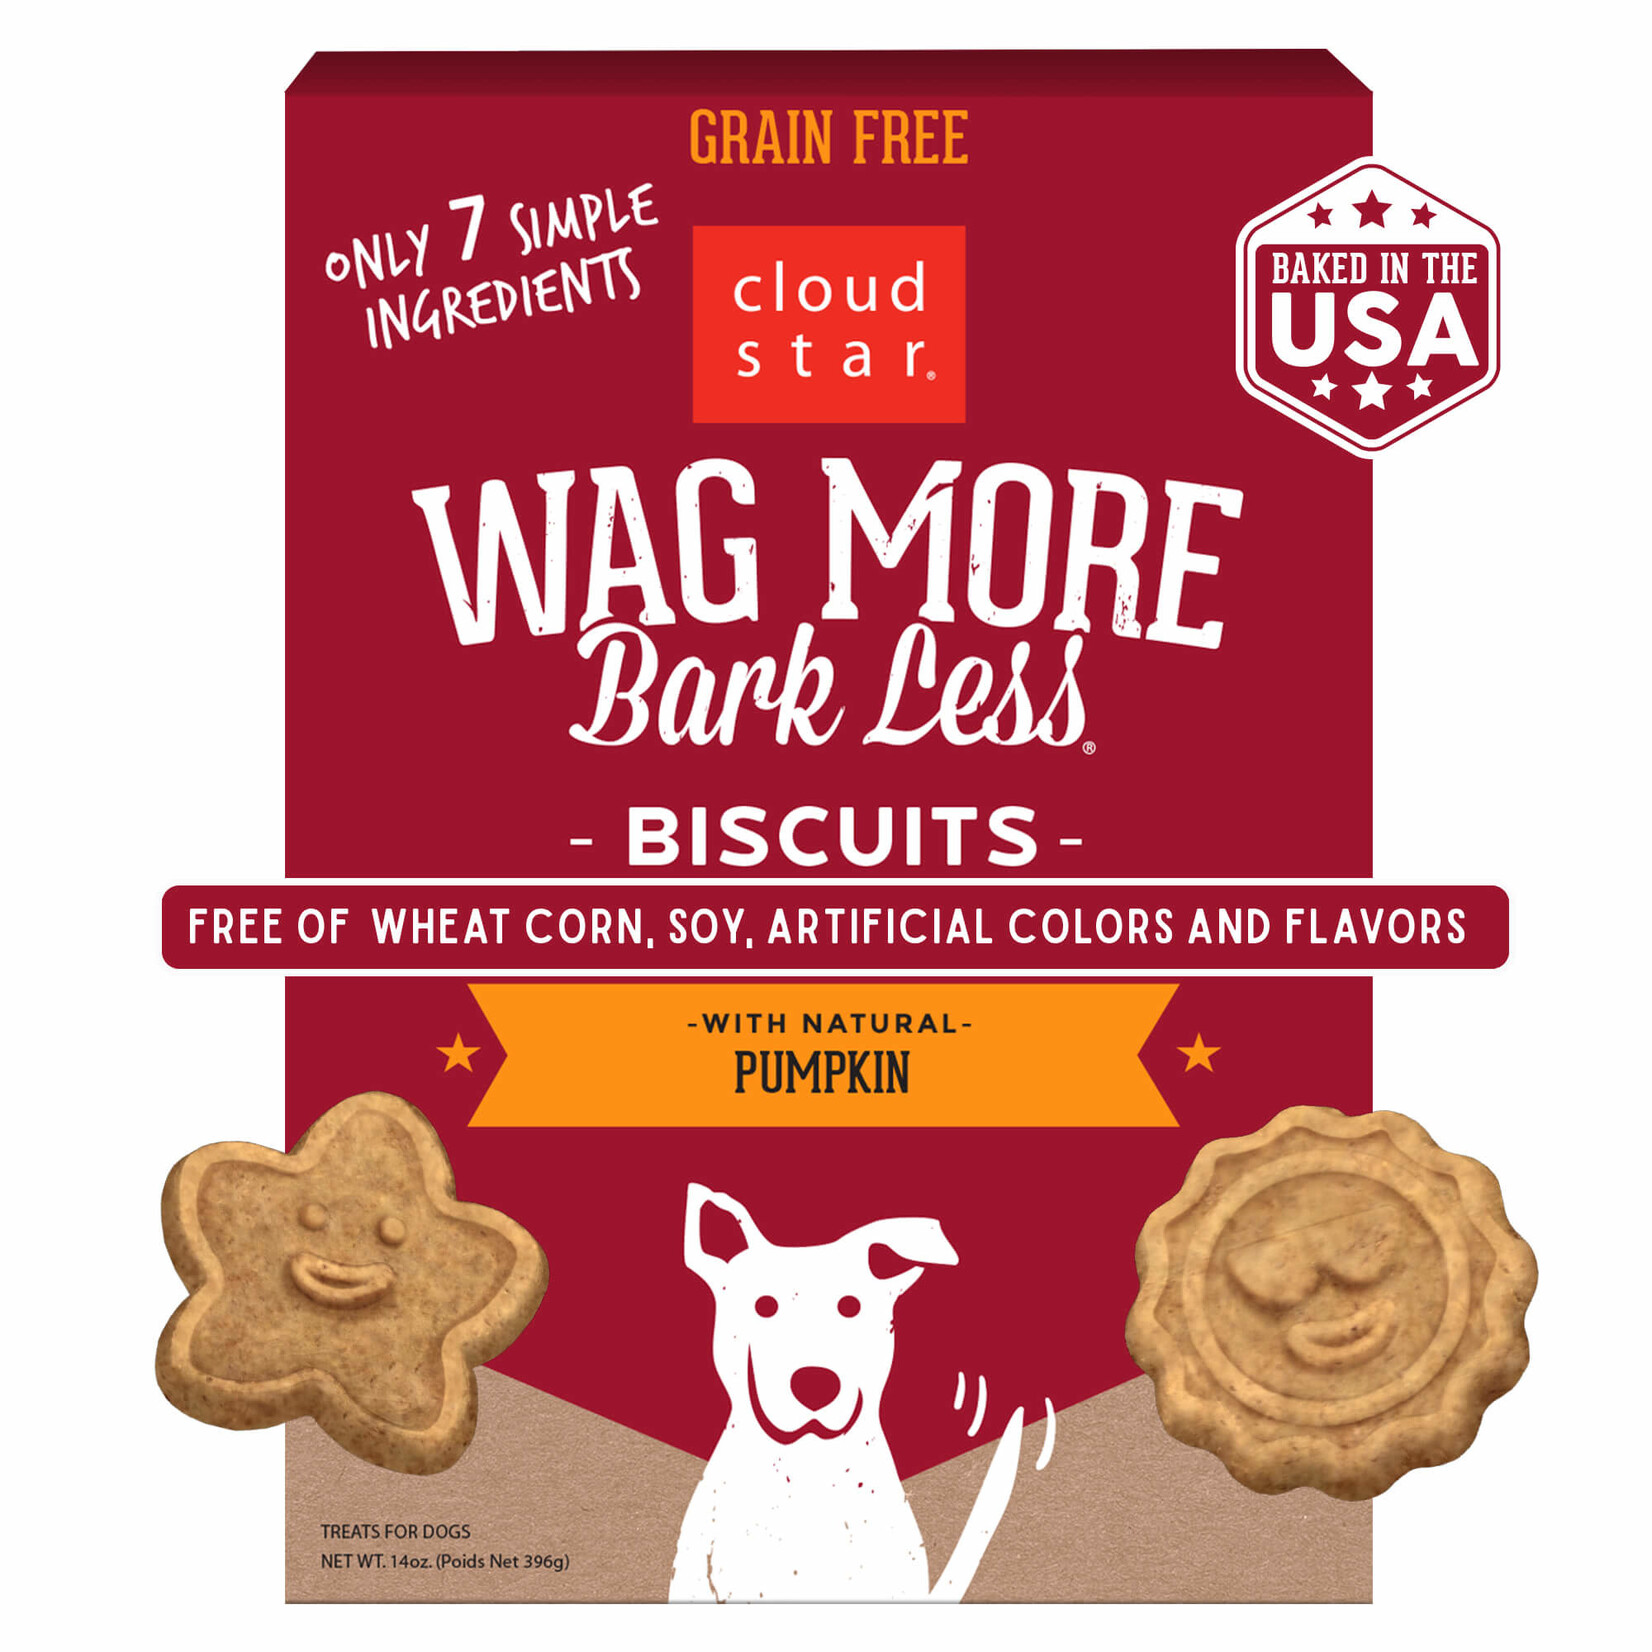 Wag More Bark Less Oven Baked Biscuits with Pumpkin